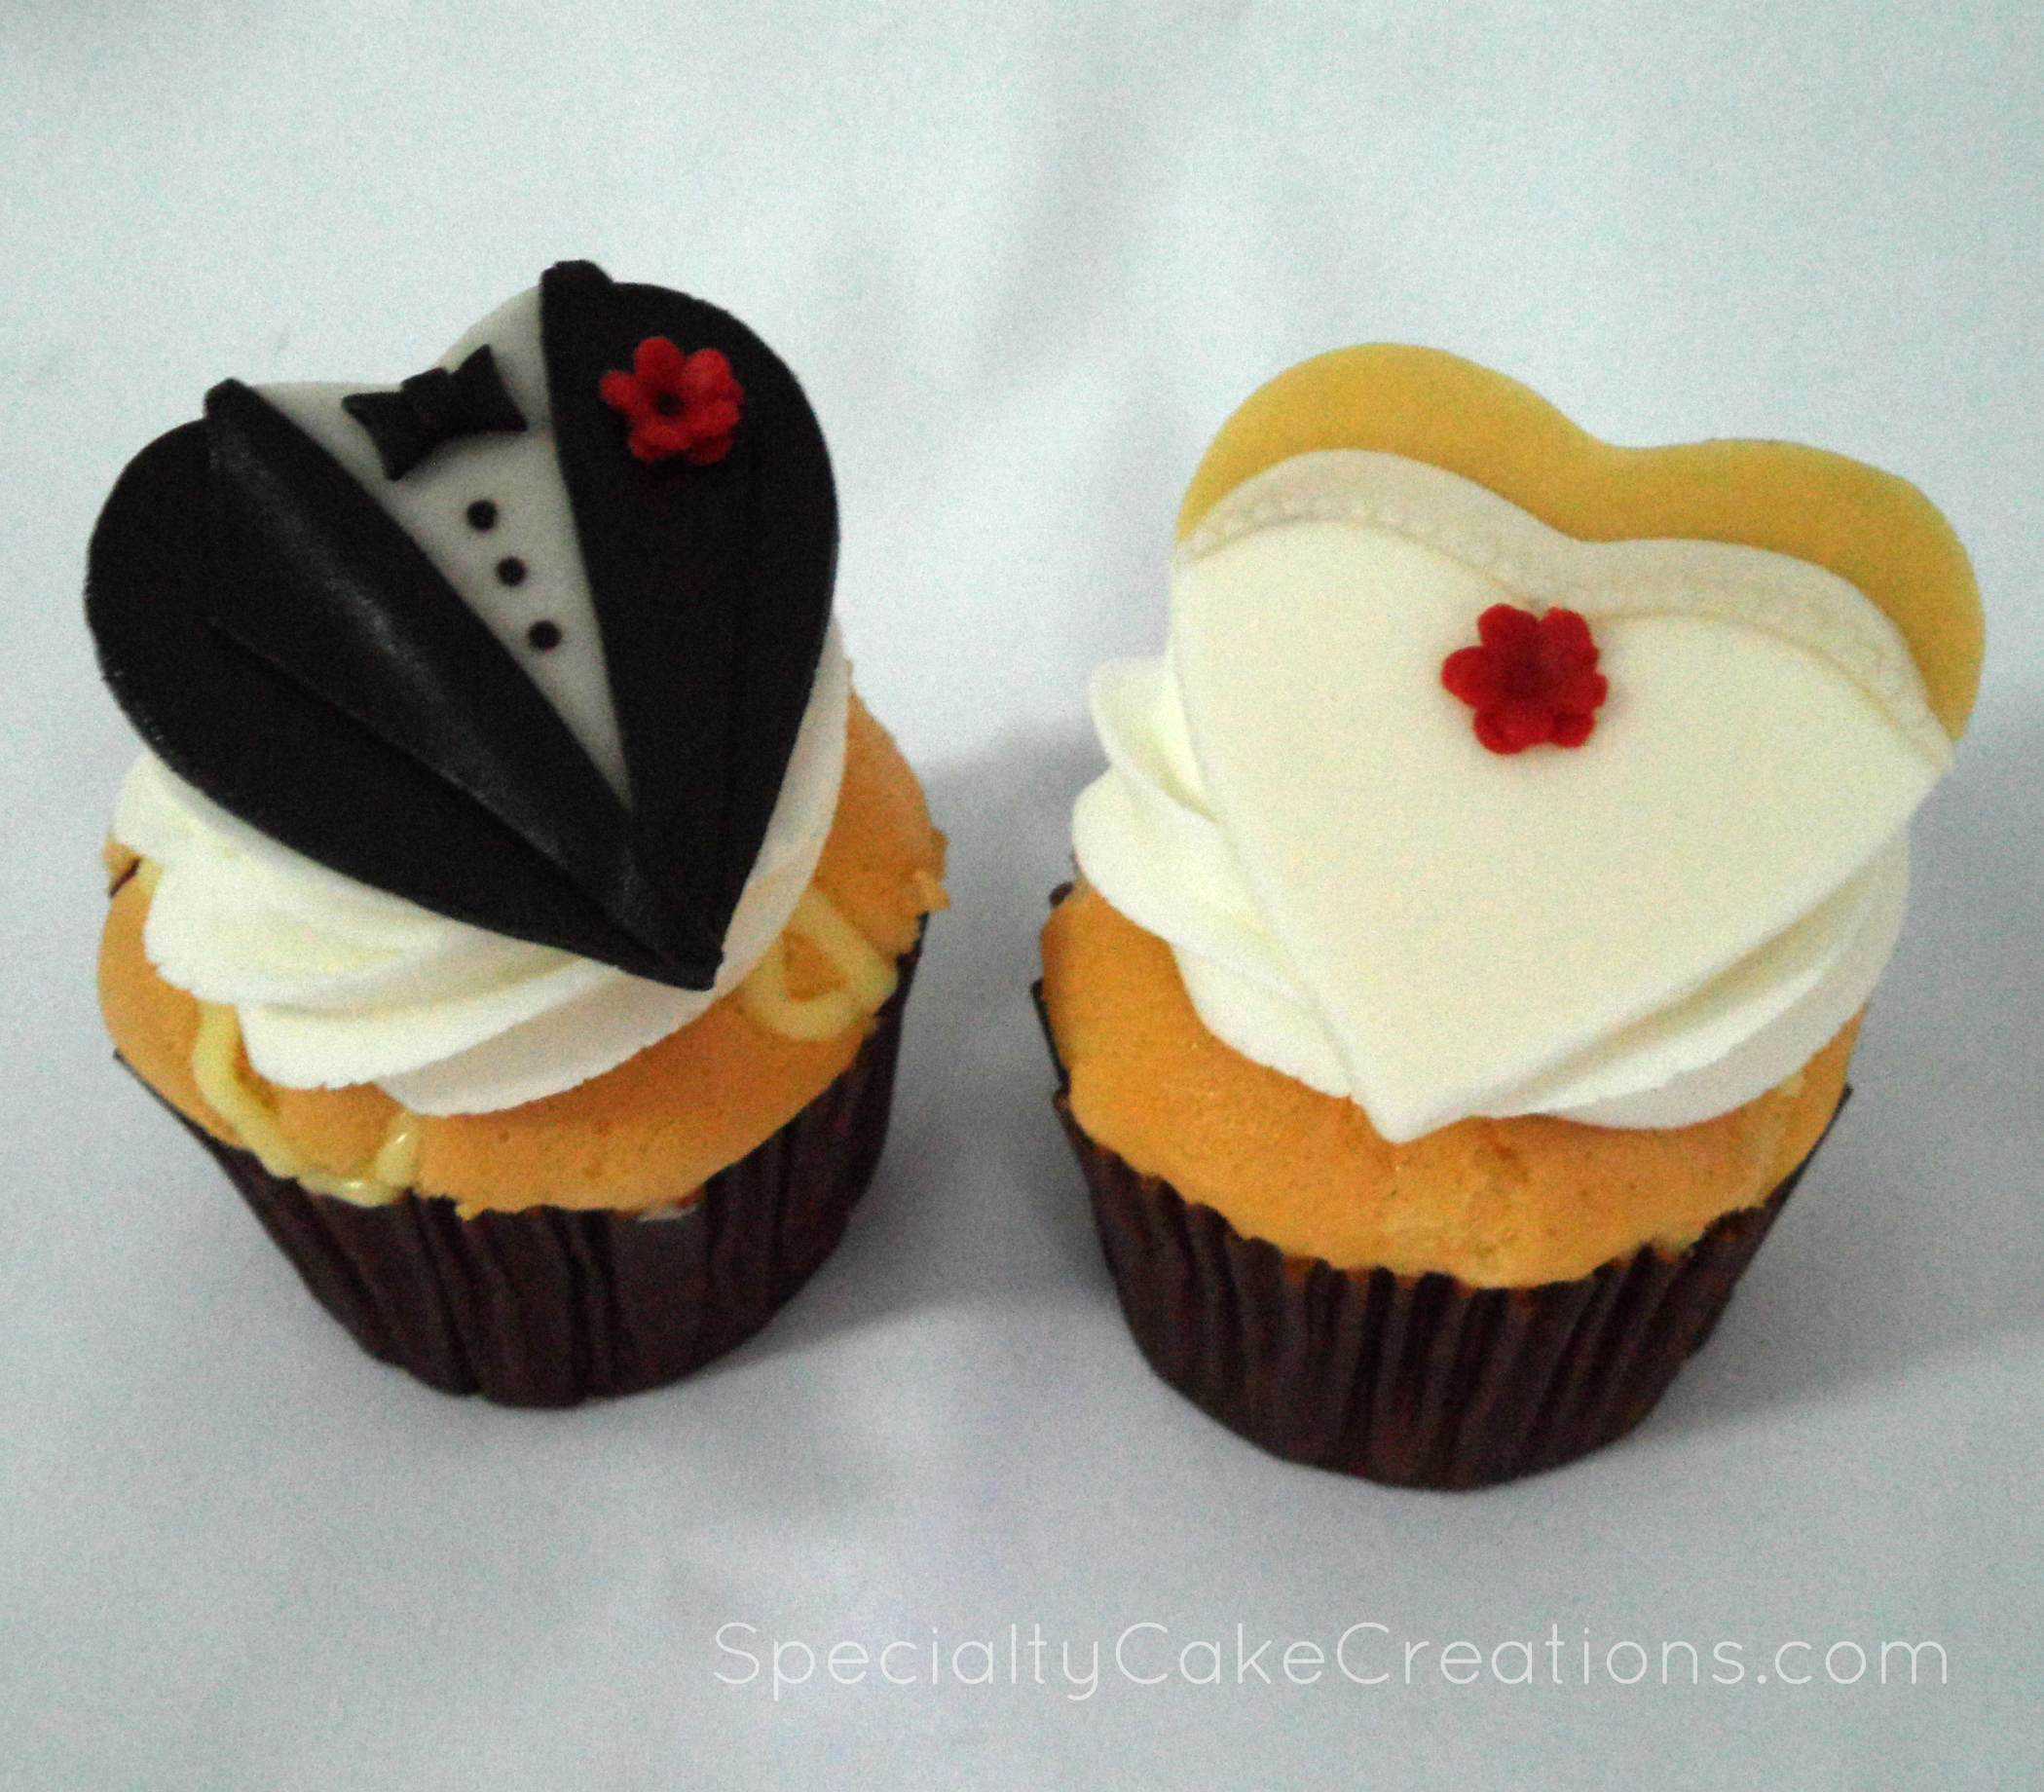 Cupcakes for Weddings